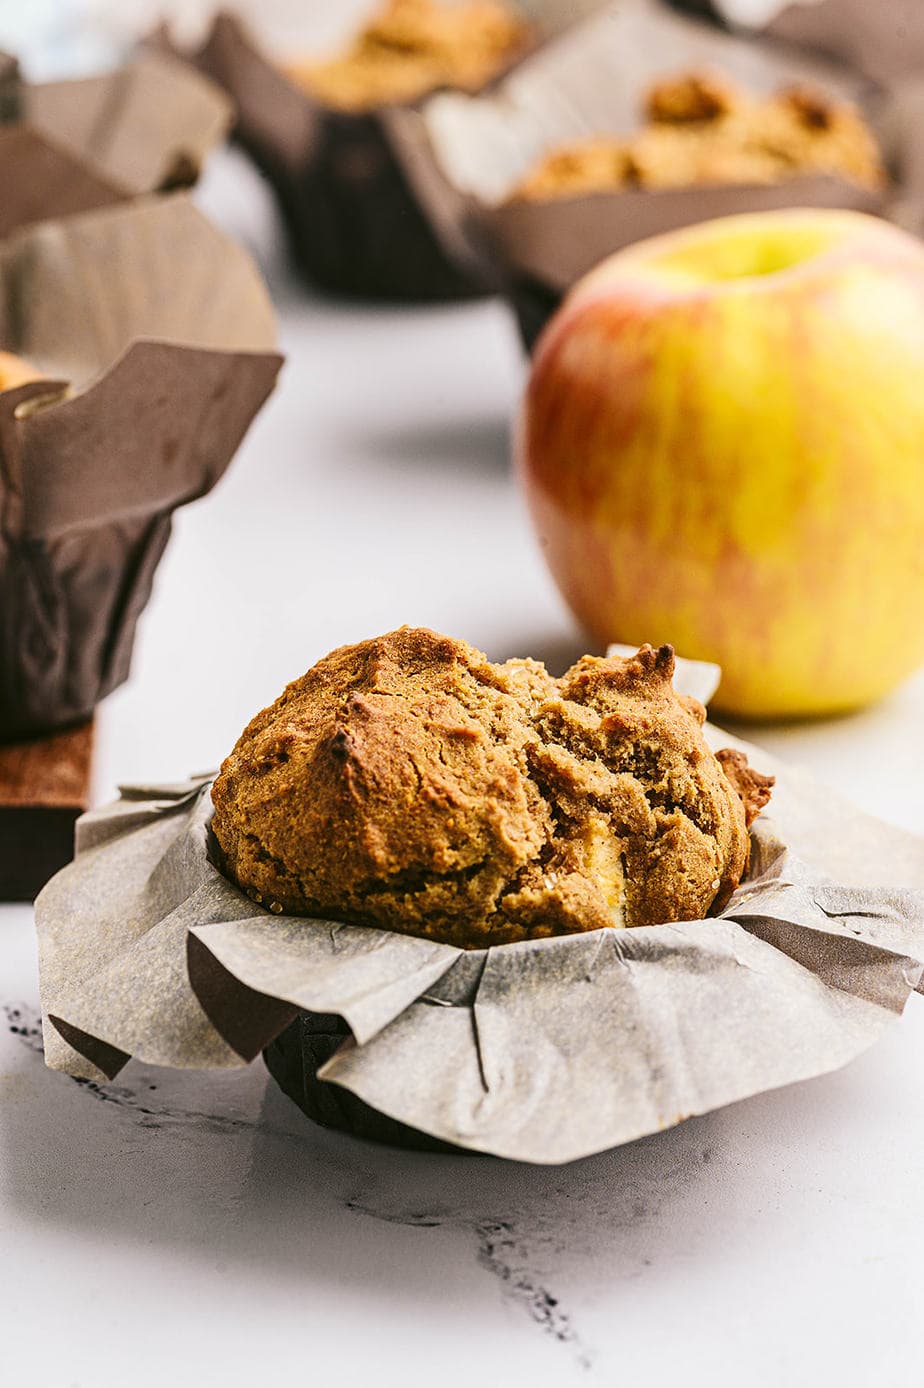 Side view: Healthy apple muffin wrapped in parchment, with many muffins in the background